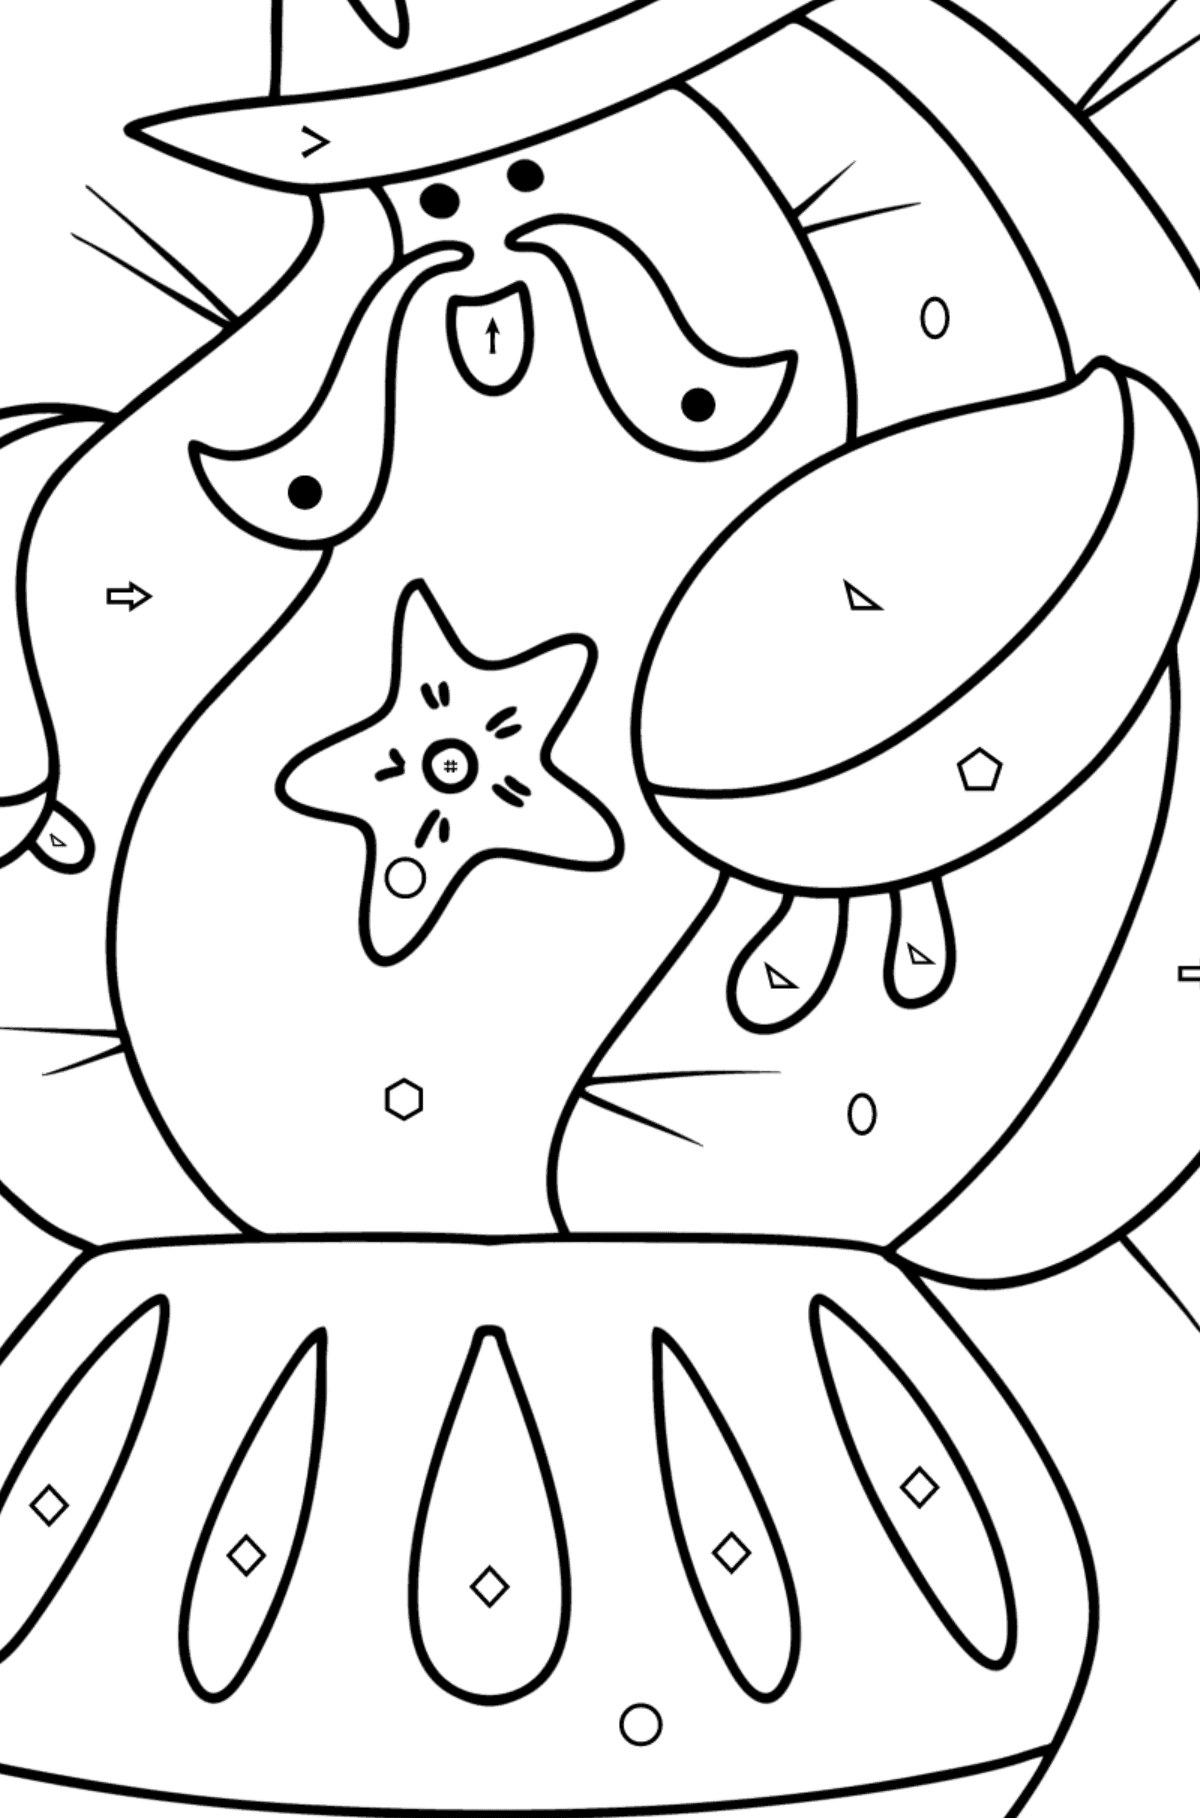 Sheriff Cactus coloring page - Coloring by Symbols and Geometric Shapes for Kids